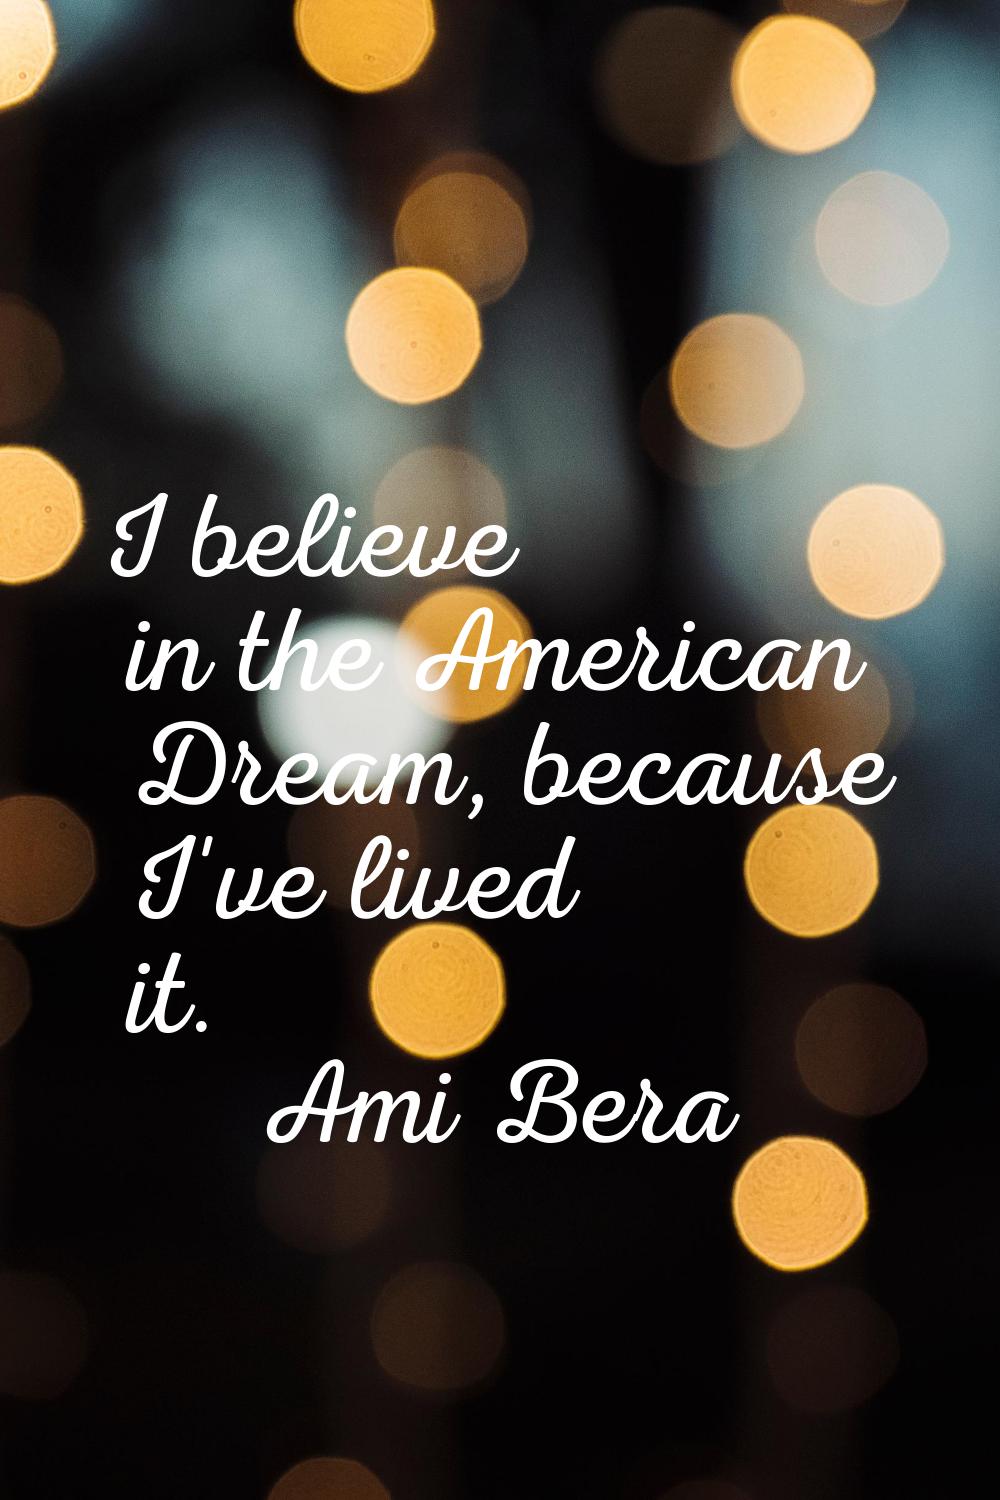 I believe in the American Dream, because I've lived it.